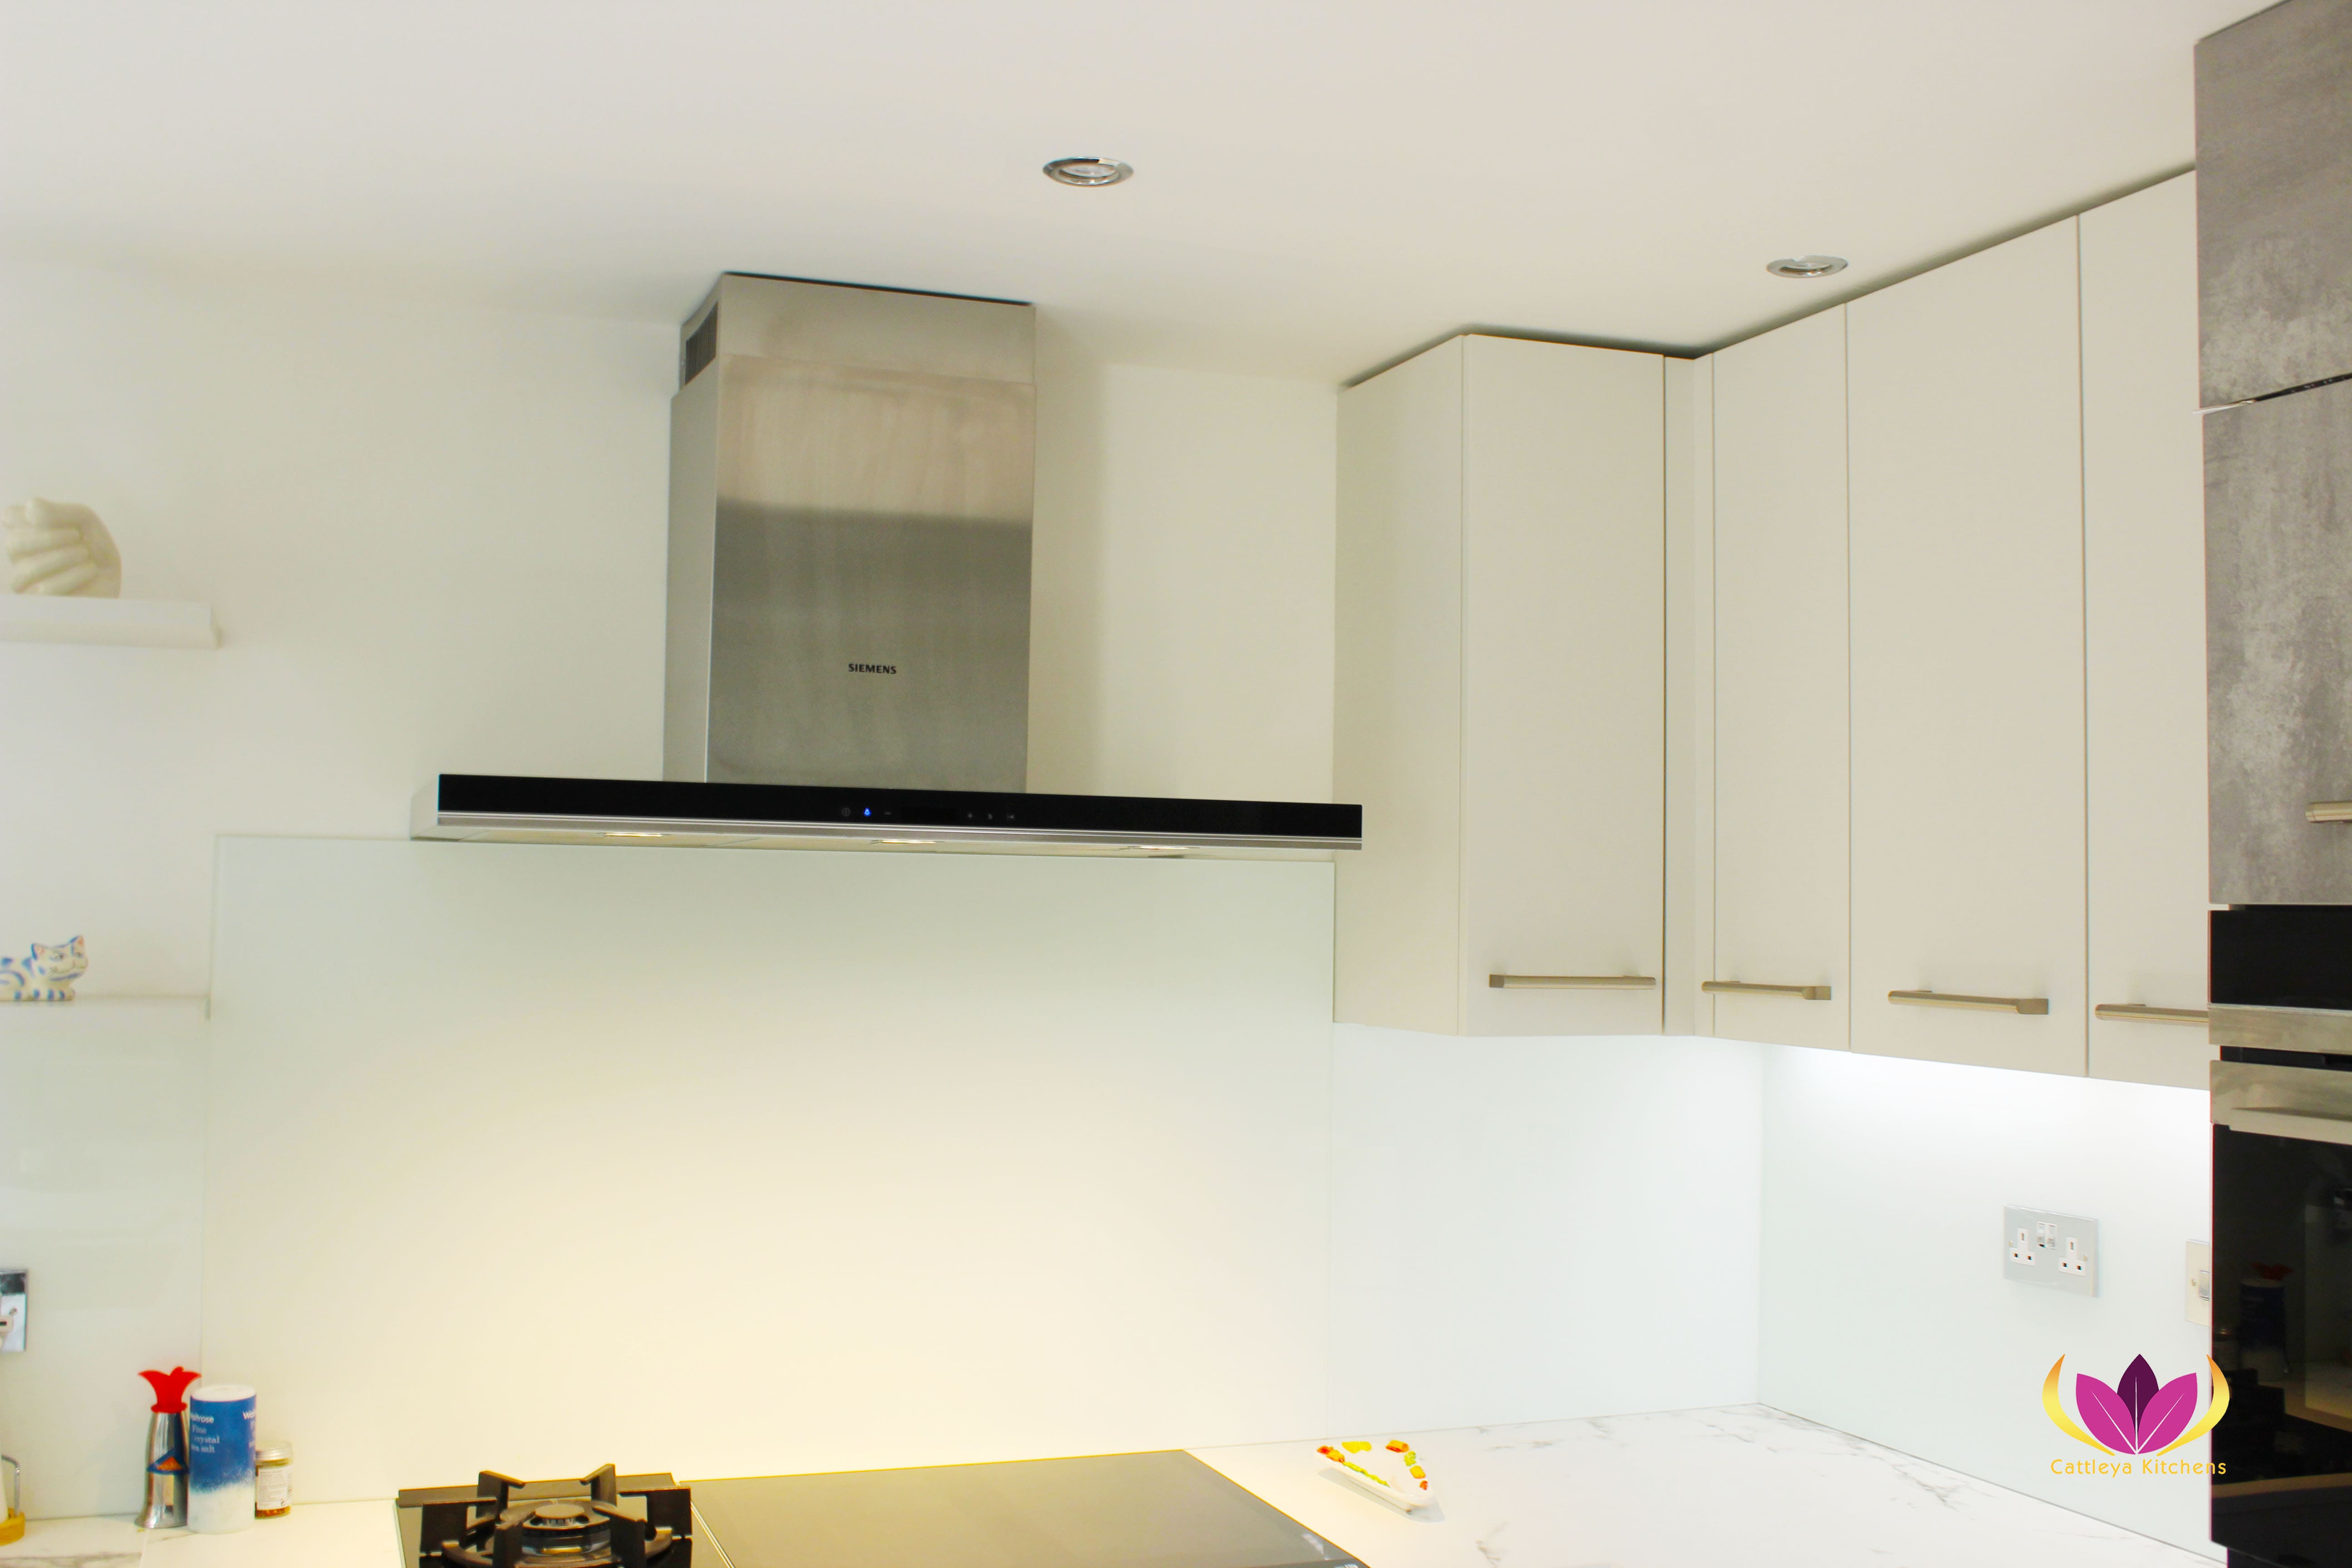 Siemens venting hod blends well with the white finished cabinets - Belsize Park Finished Kitchen Project